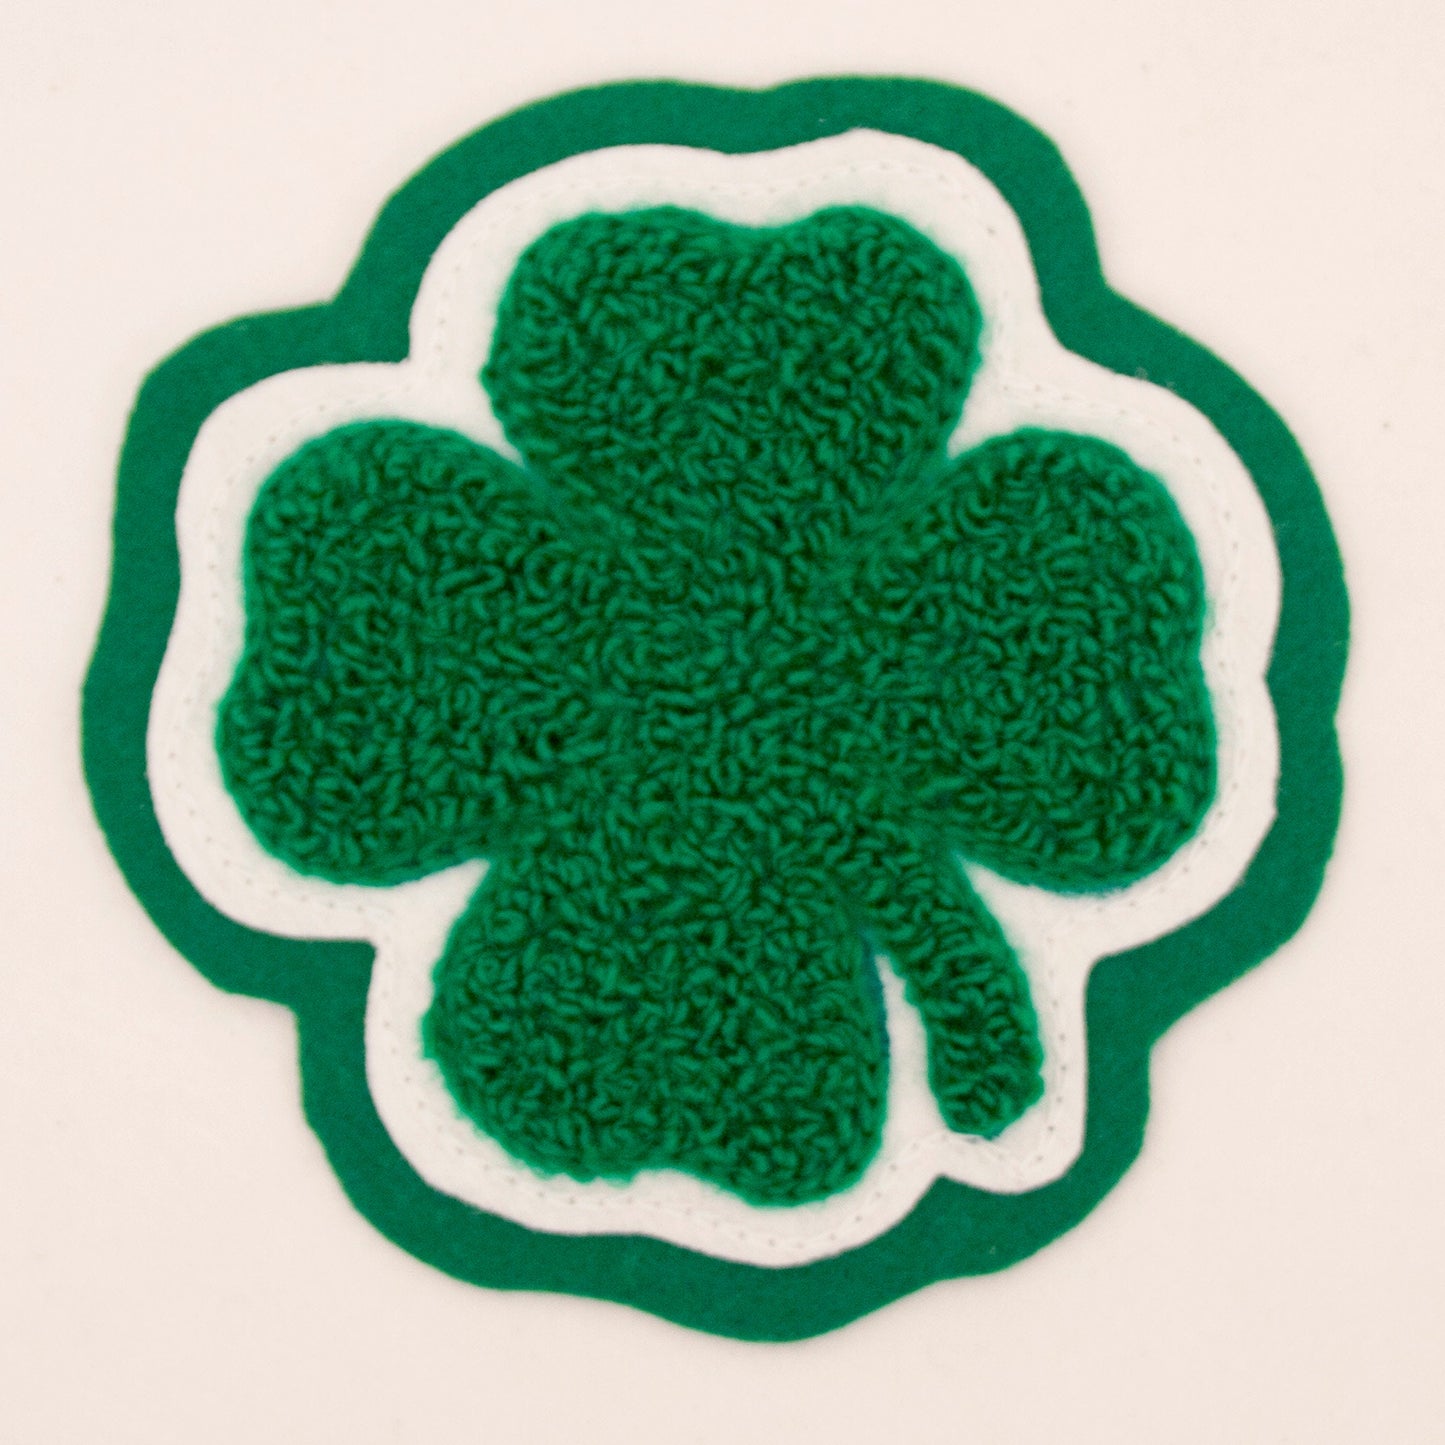 Luck of the Irish! St. Patrick's Day Shamrock - Hand Sewn Chenille Patch #129